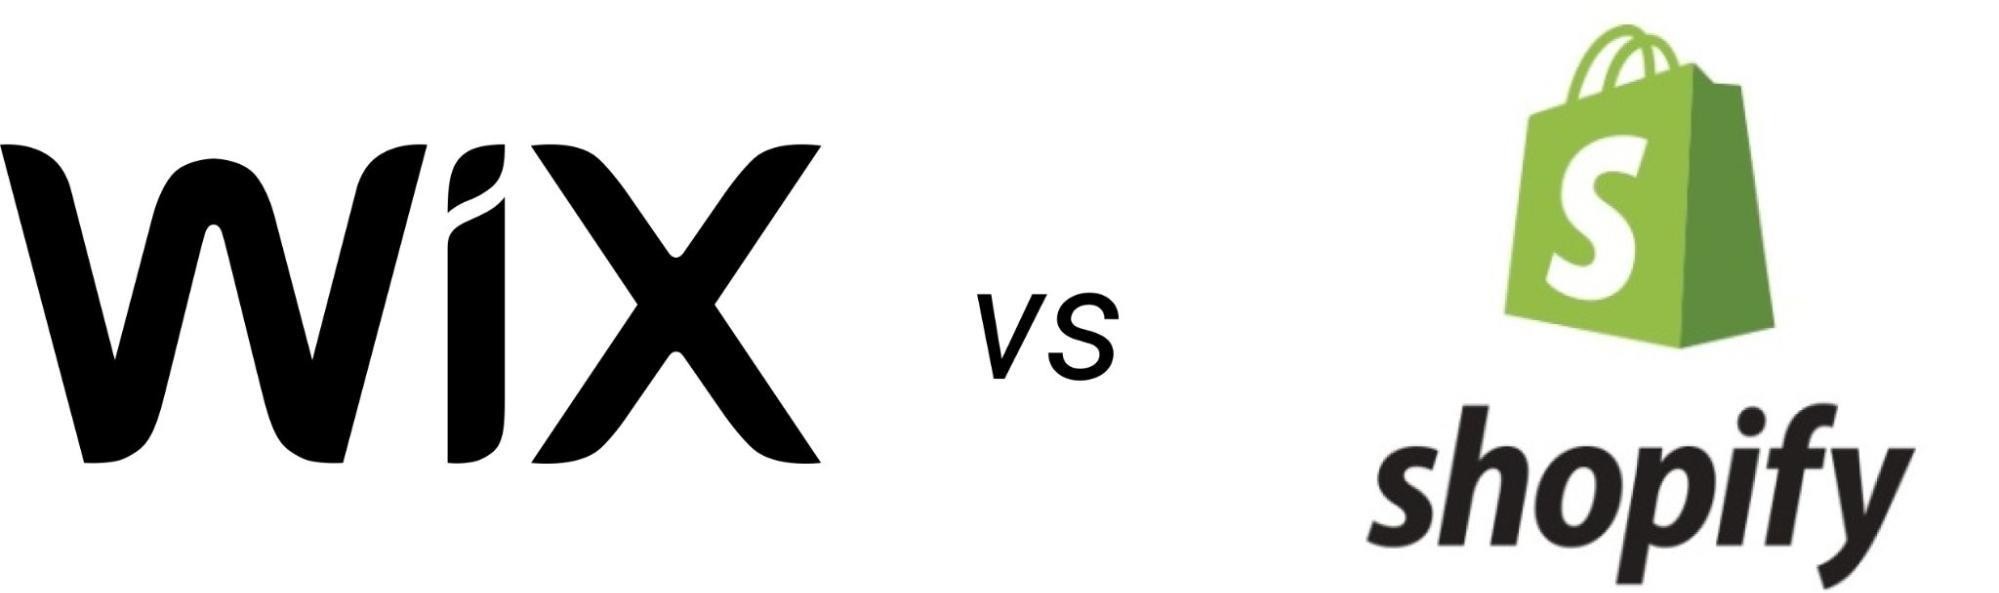 Wix or Shopify